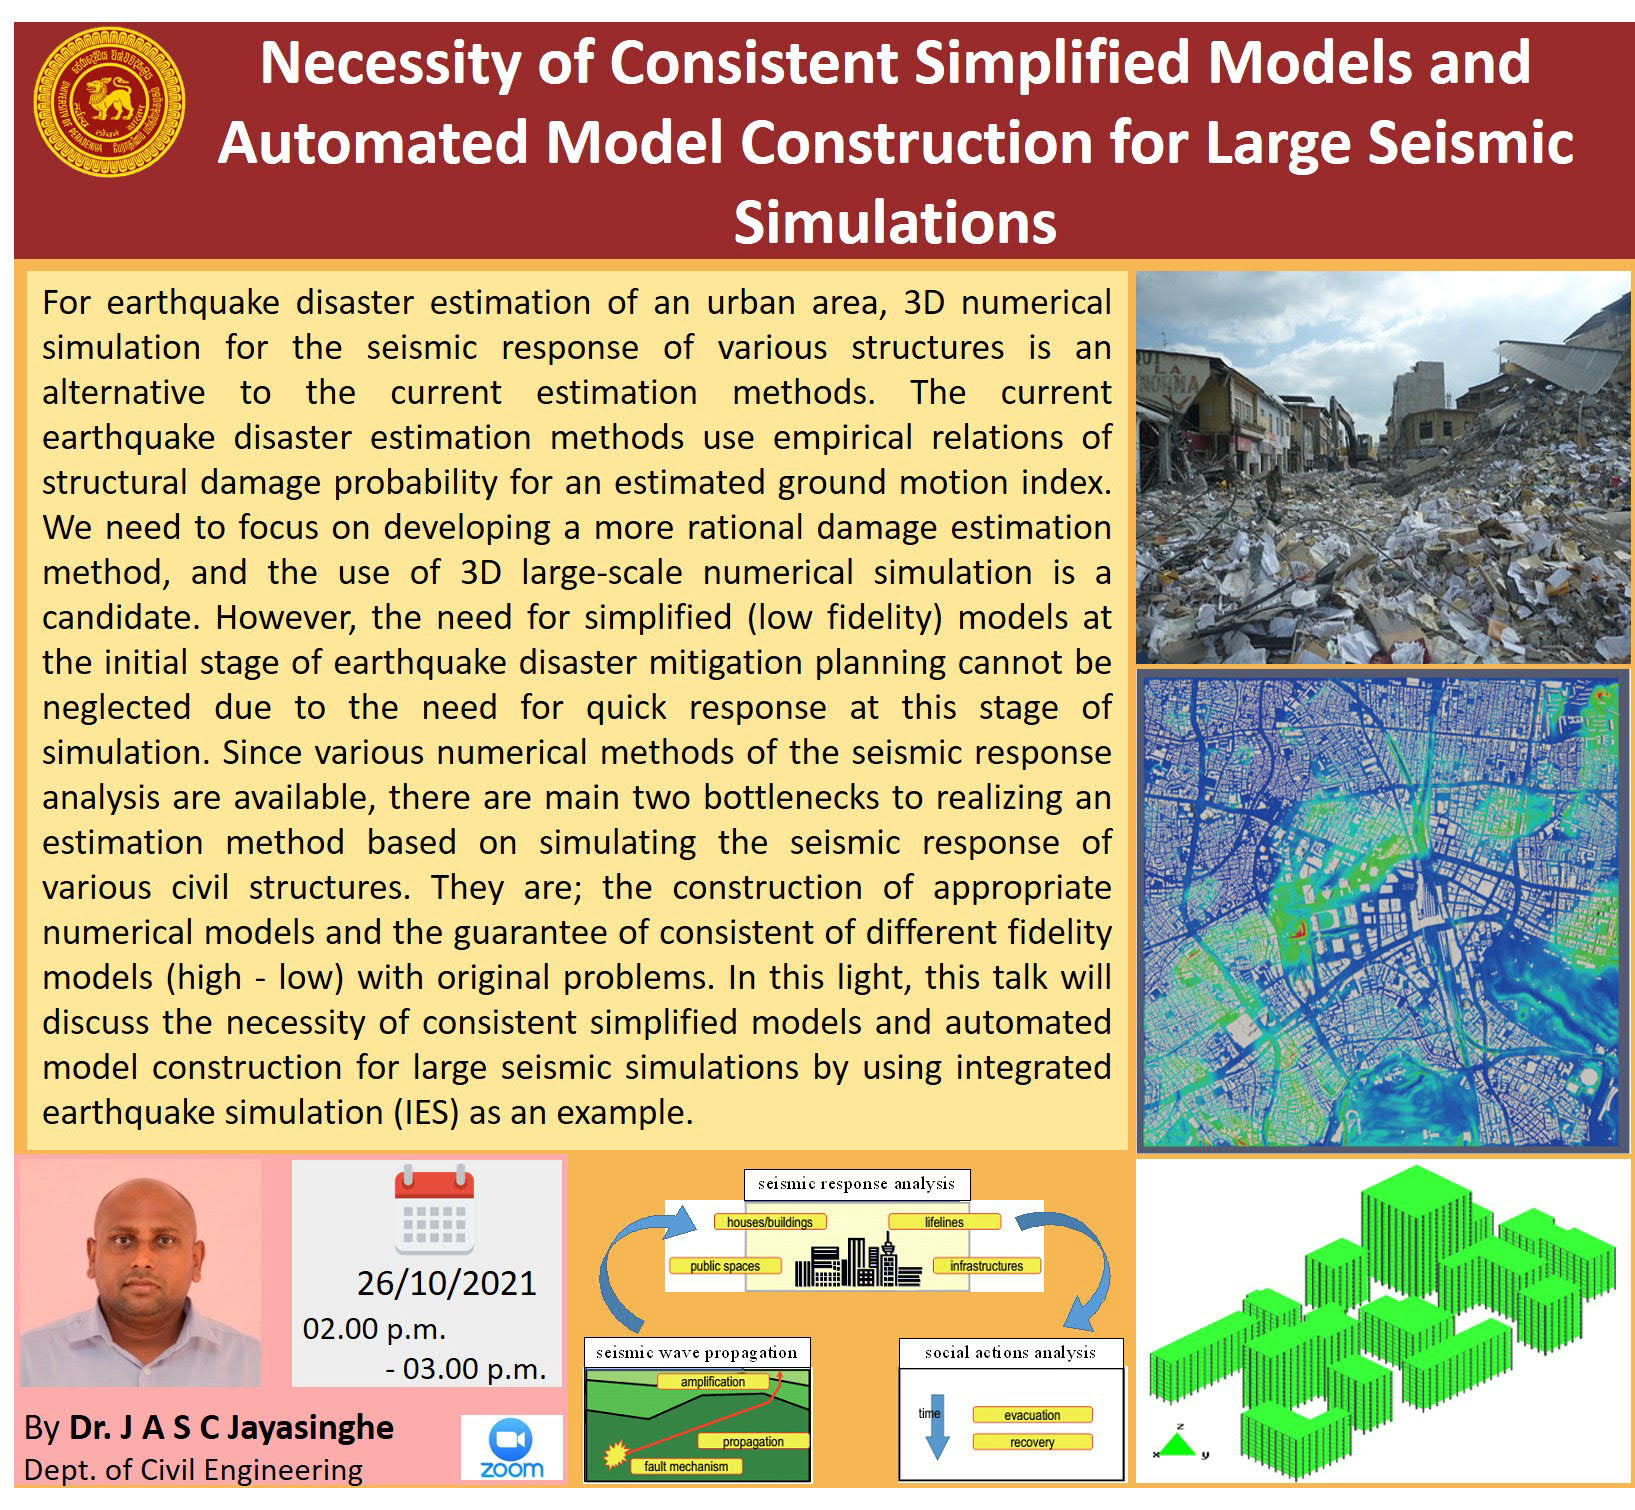 Necessity of Consistent Simplified Models and Automated Model Construction for Large Seismic Simulations